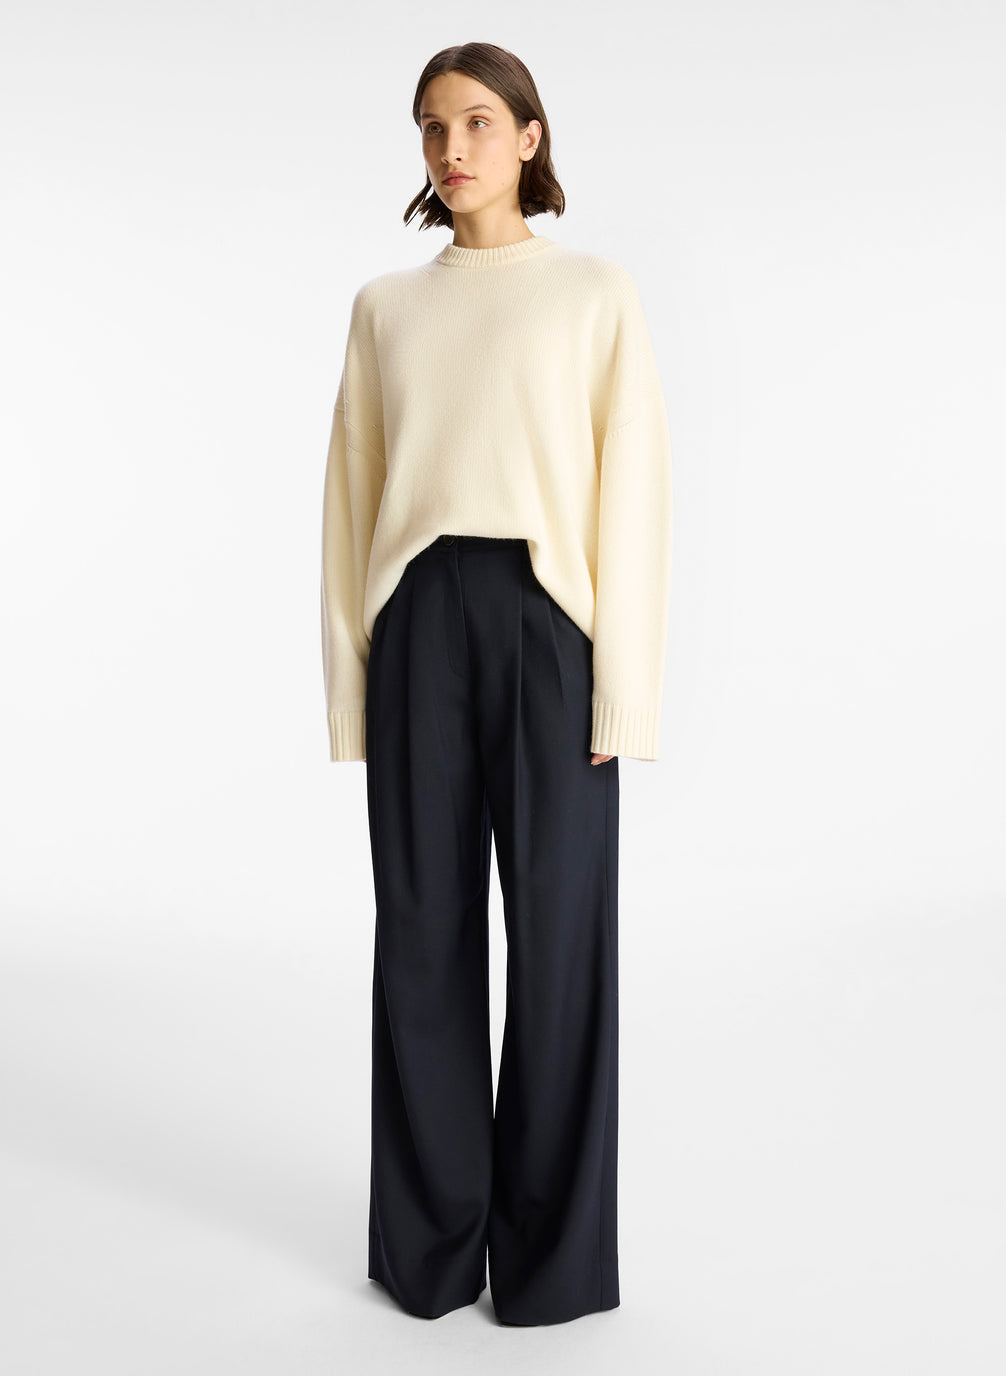 side view of woman wearing off white cashmere long sleeve sweater